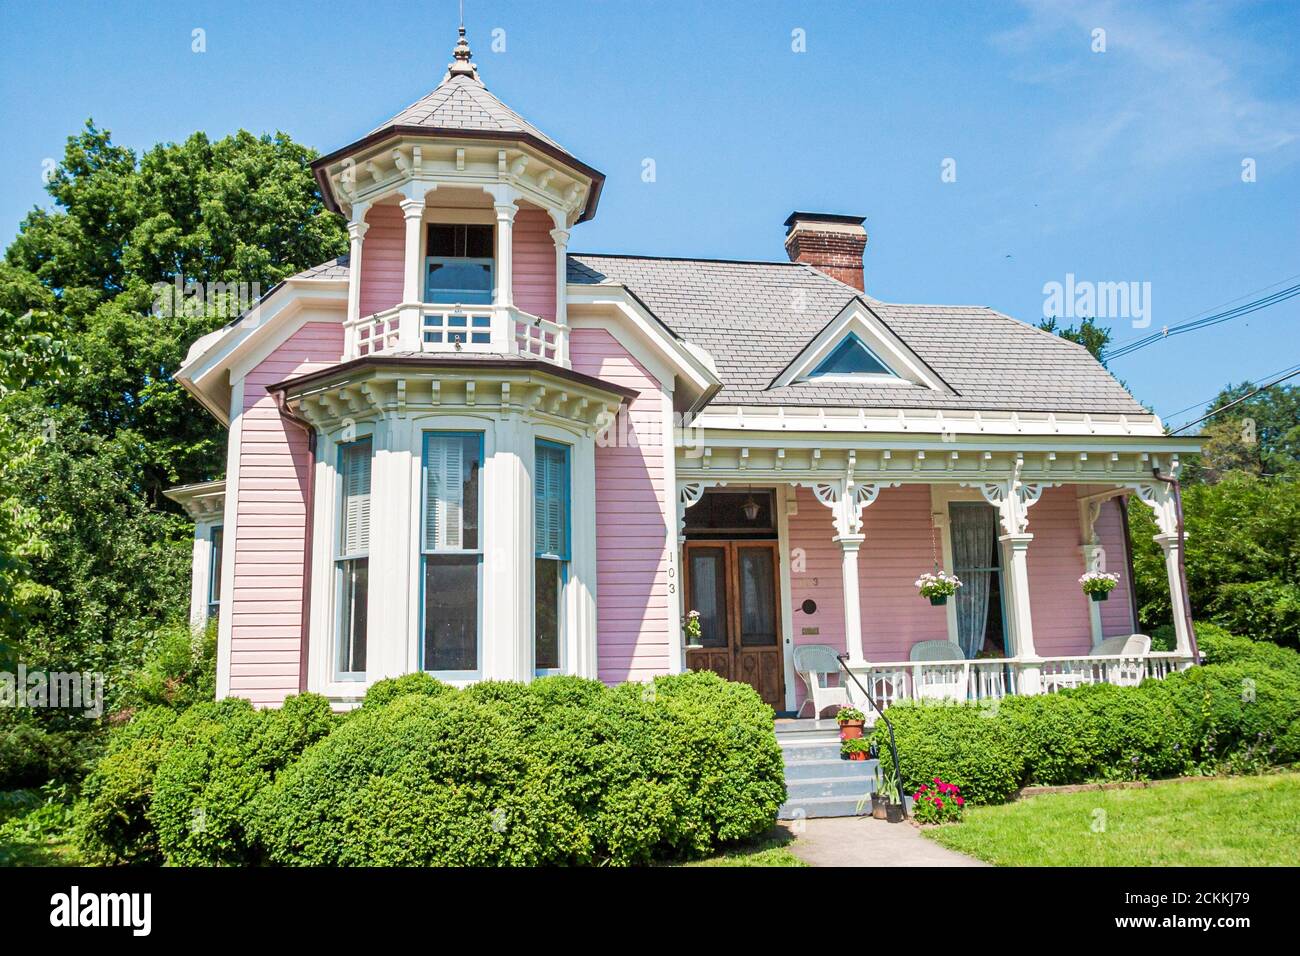 Virginia Salem Union Street Queen Anne style house home residence,built 1888, Stock Photo